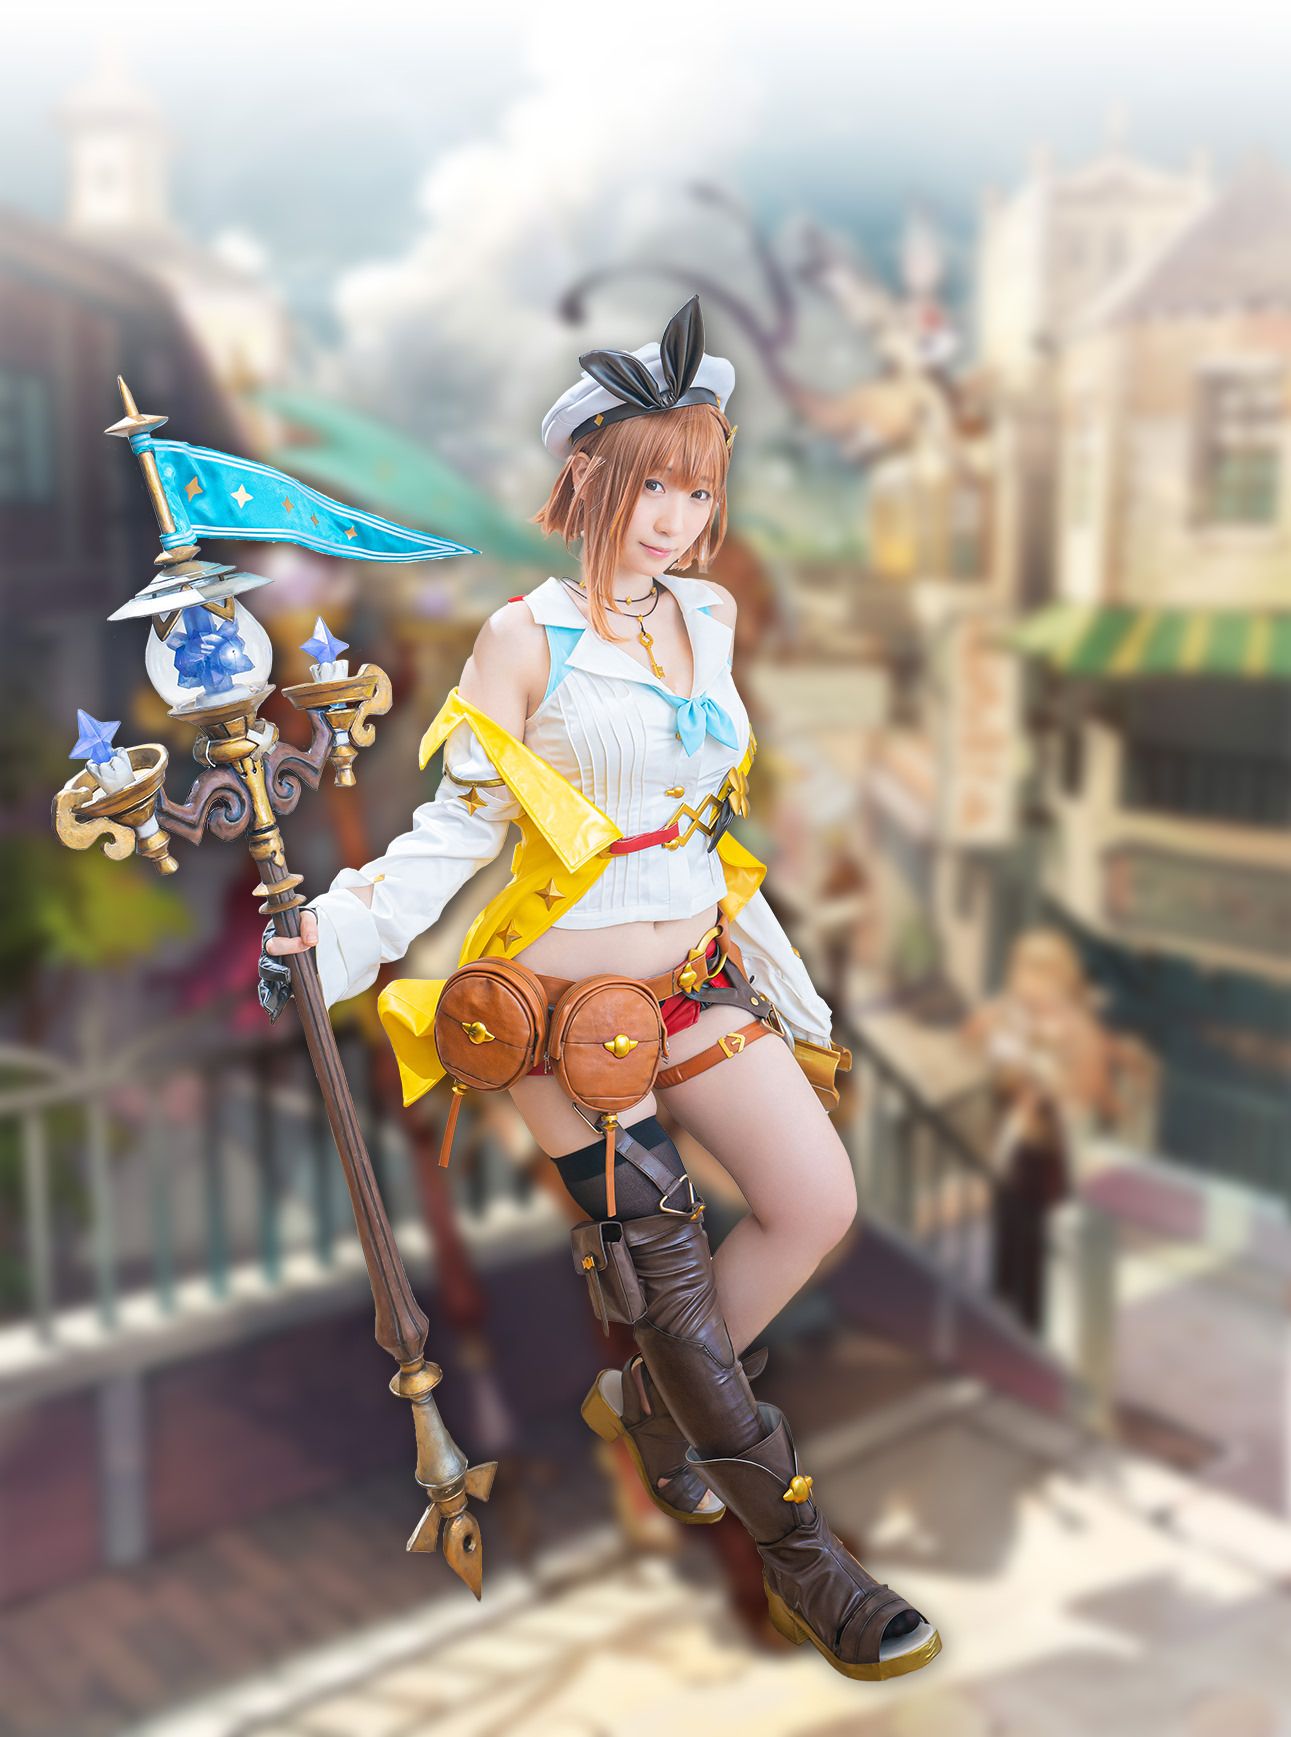 [Liza's Atelier 2] Iori Mo jacks the official site in cosplay that reproduces Liza's thighs! 8